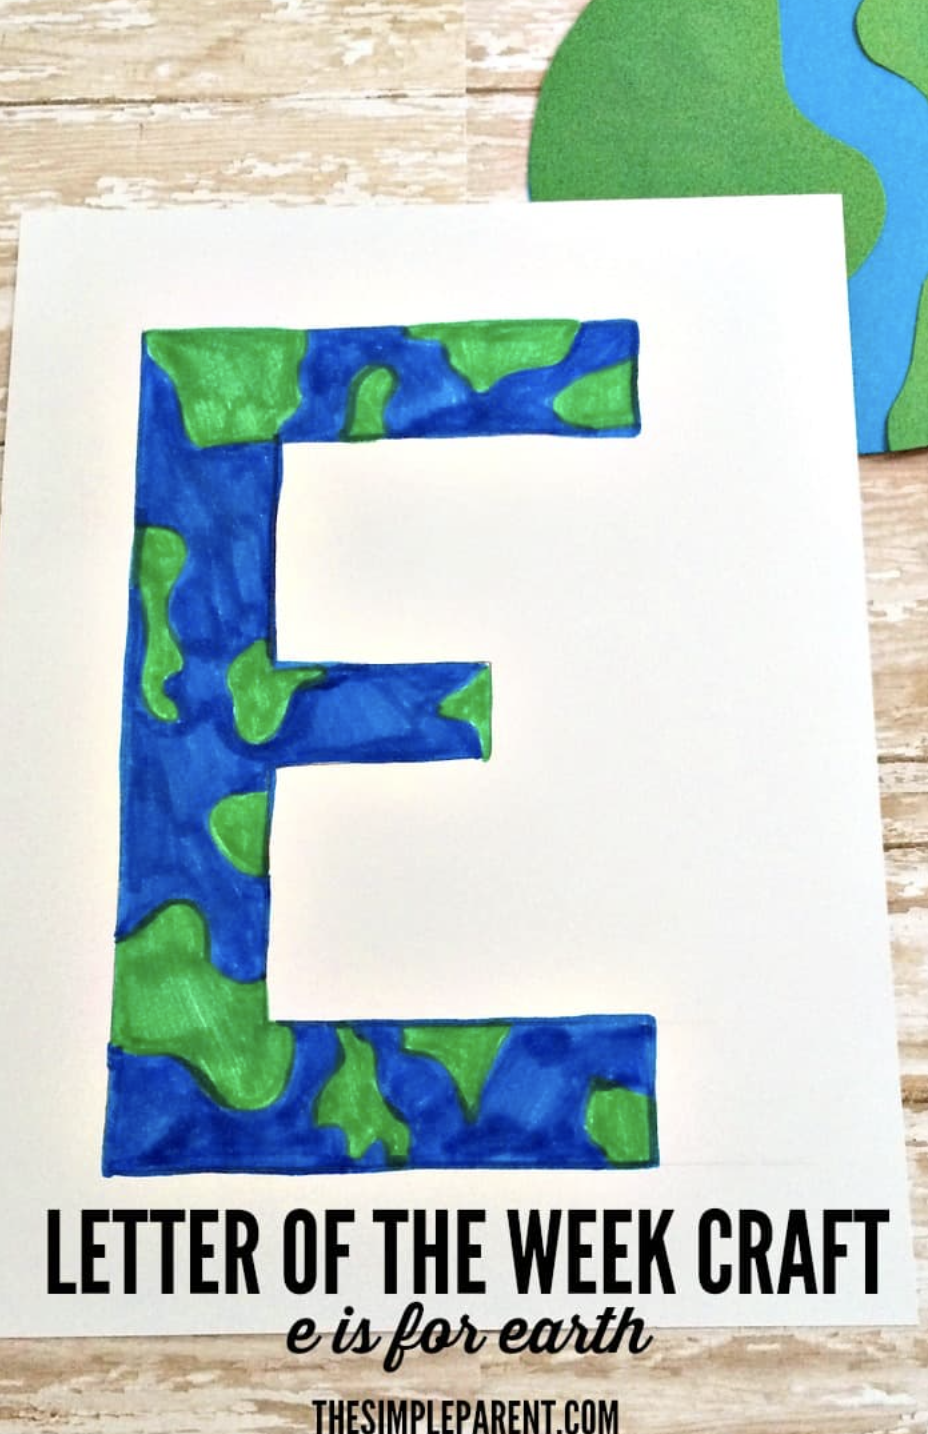 38) E is for Earth Craft